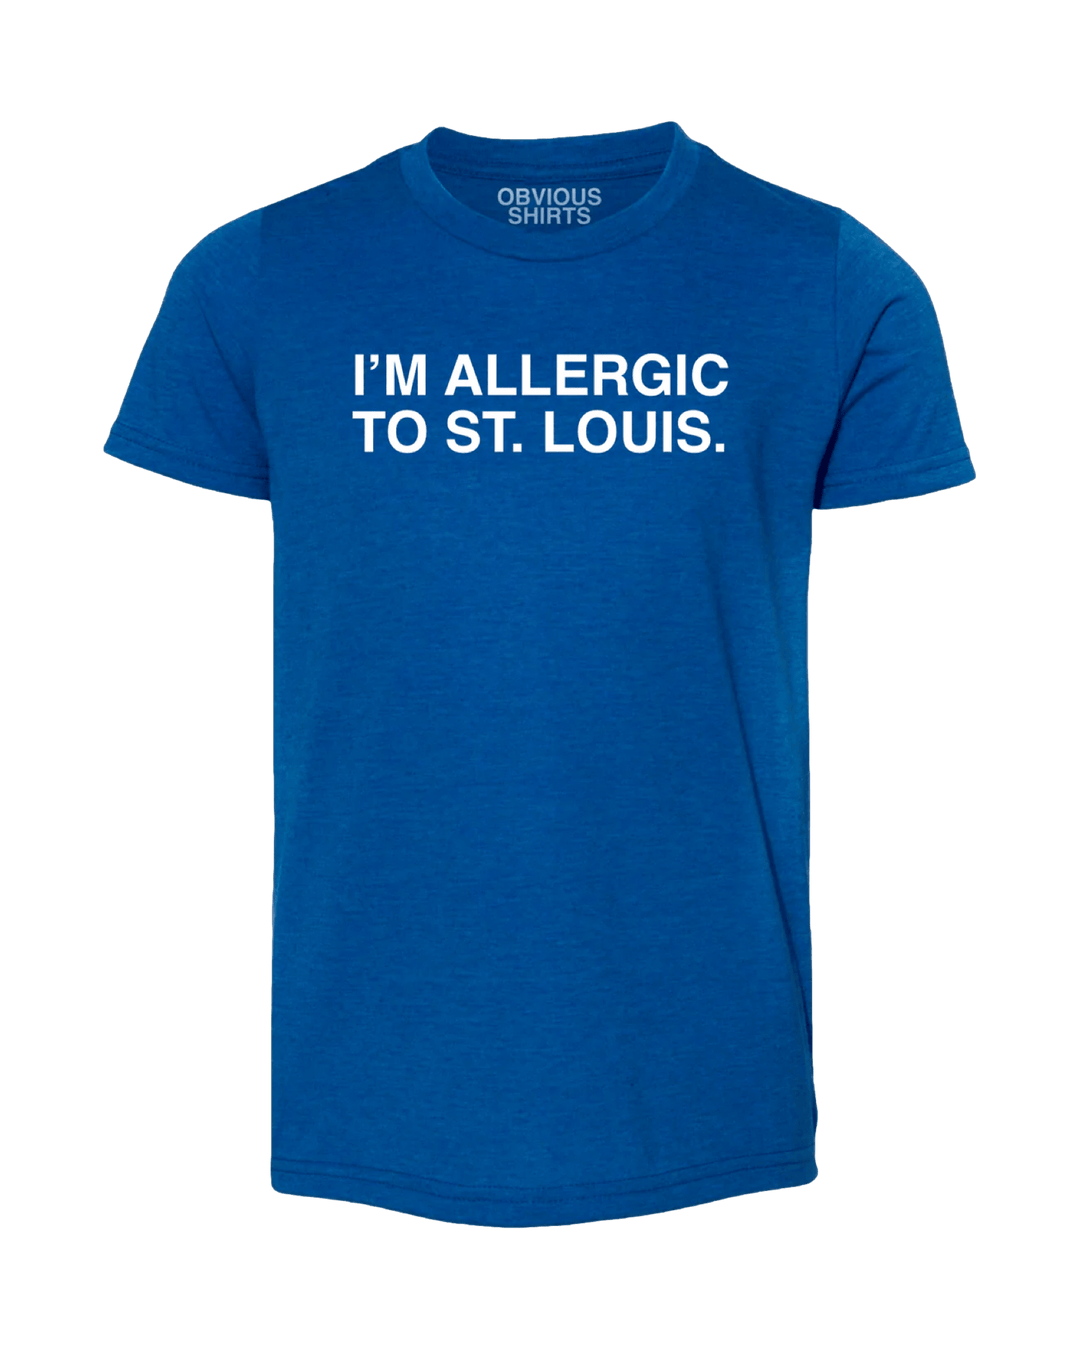 I'M ALLERGIC TO ST. LOUIS. (YOUTH) - OBVIOUS SHIRTS